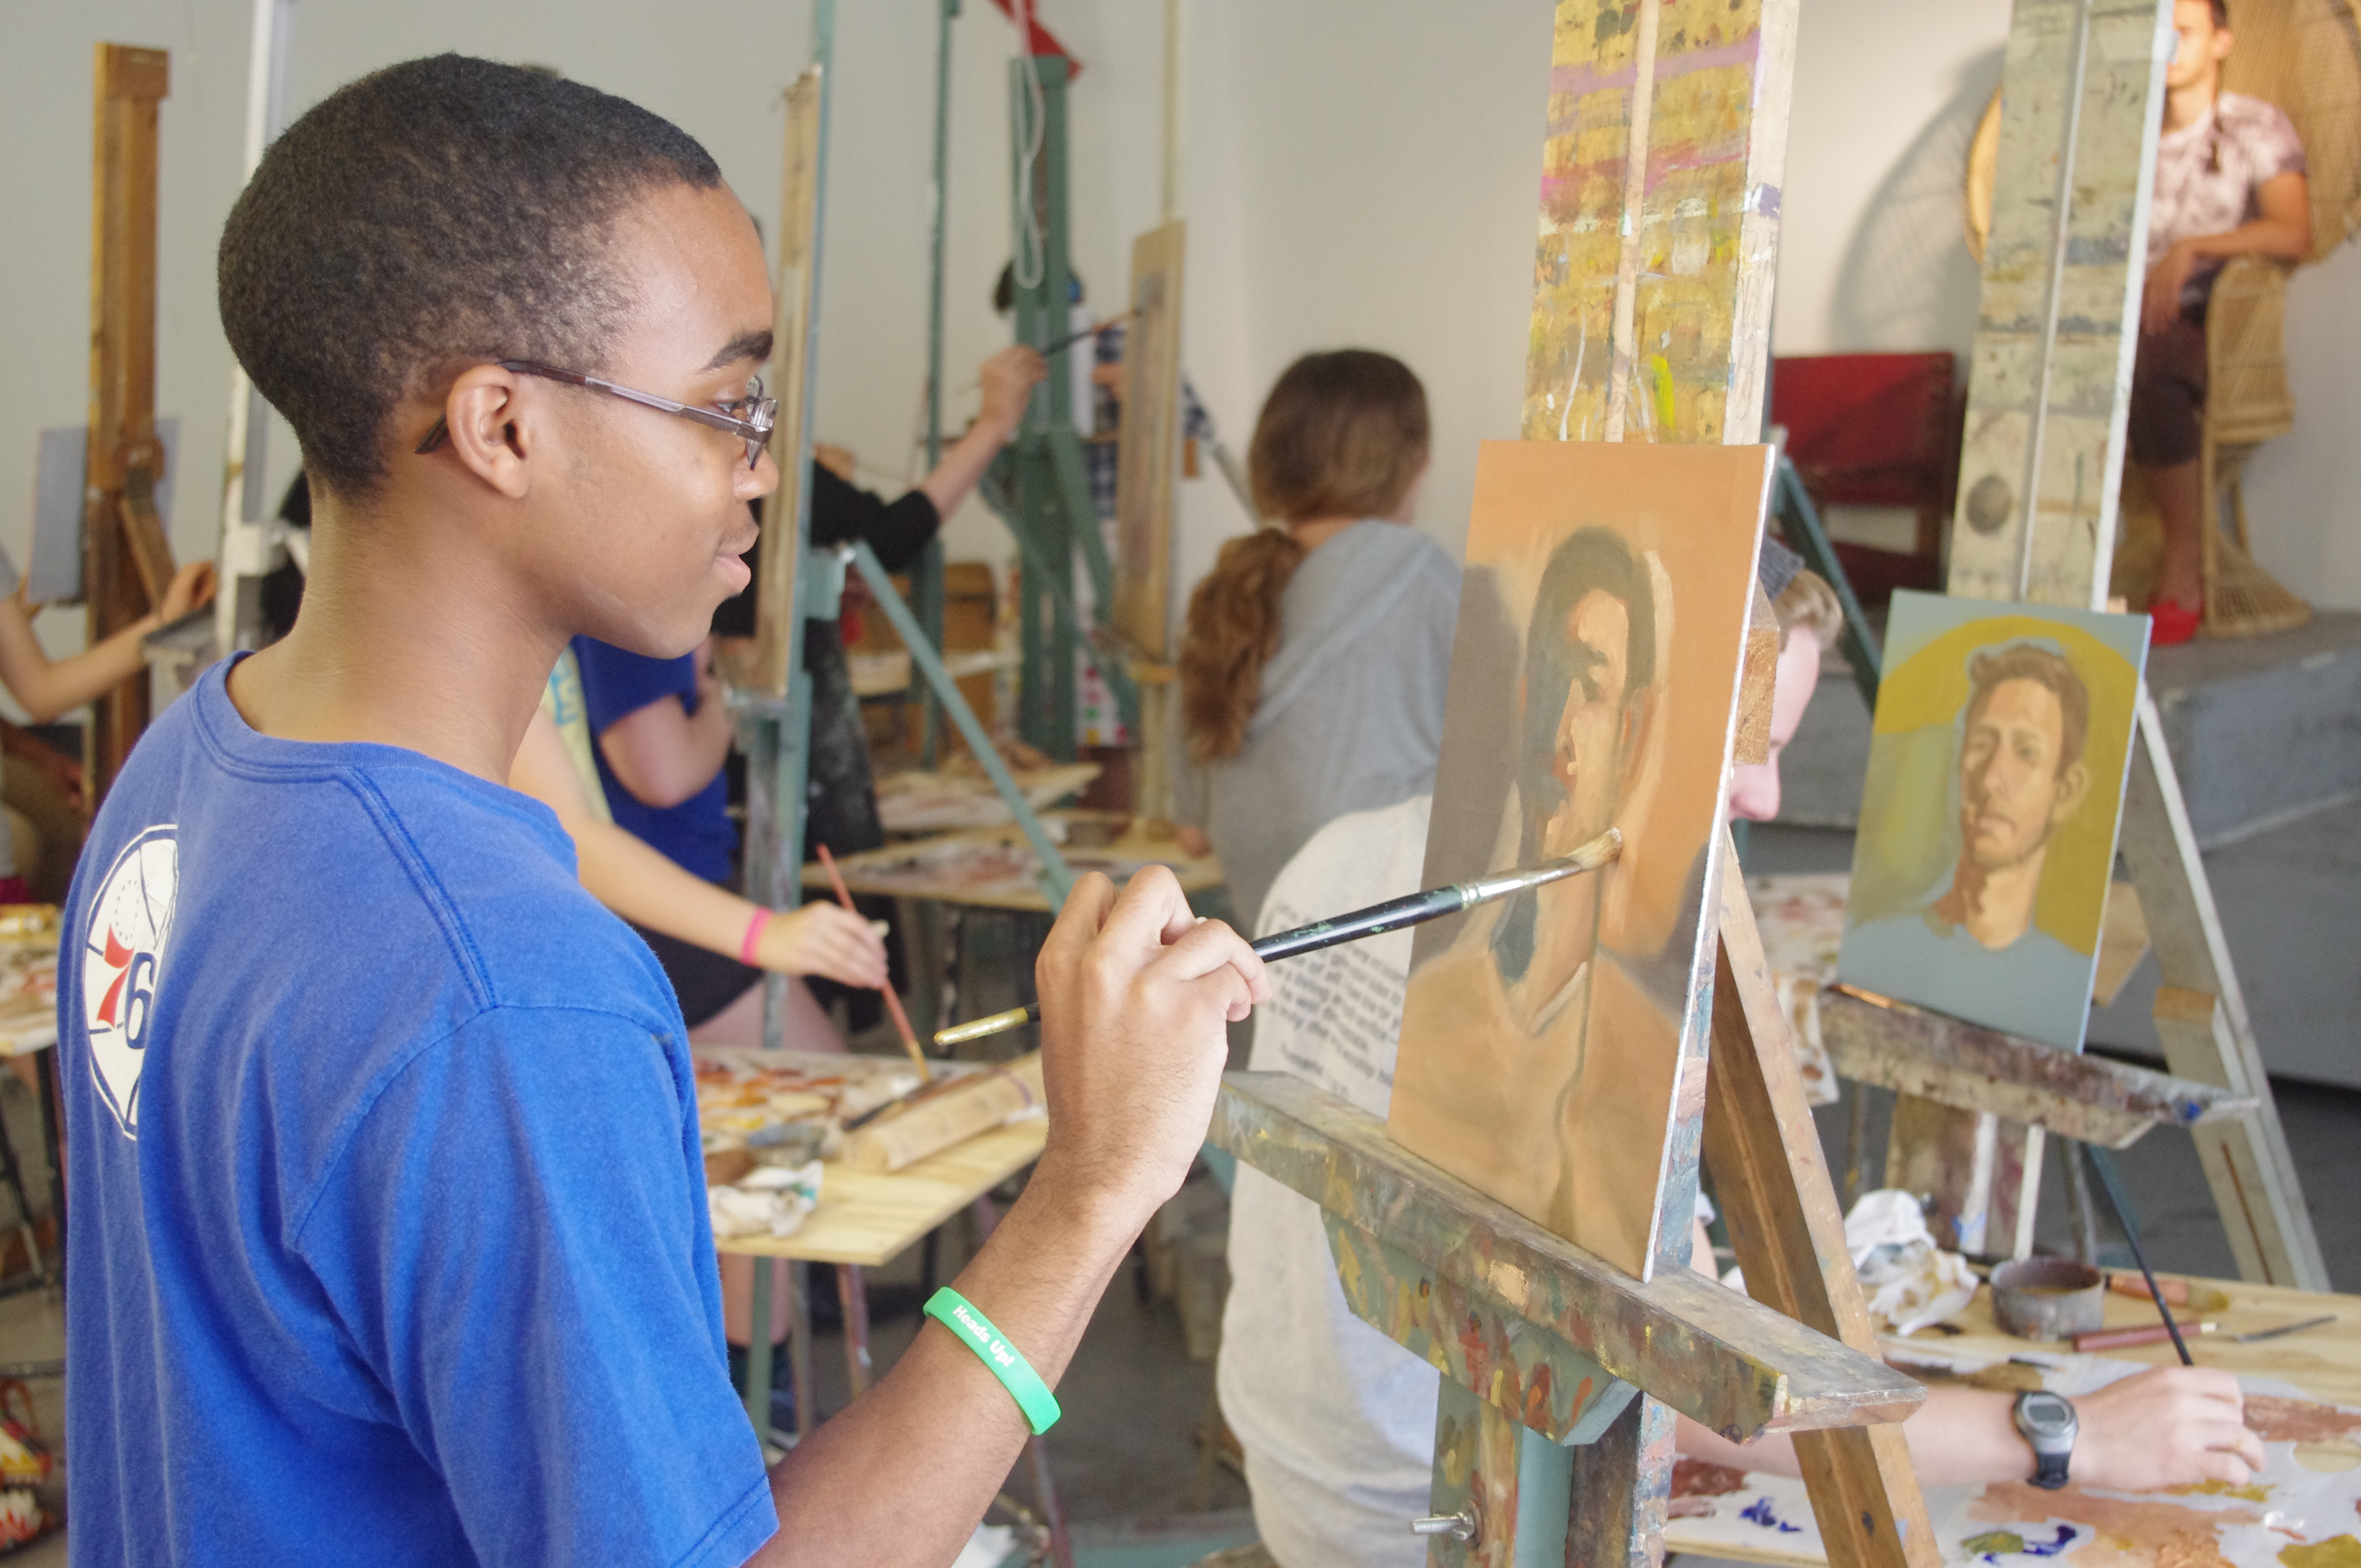 A student in a blue shirt holds a paintbrush up to an in-progress portrait on an easel. Other students work on easels in the background.